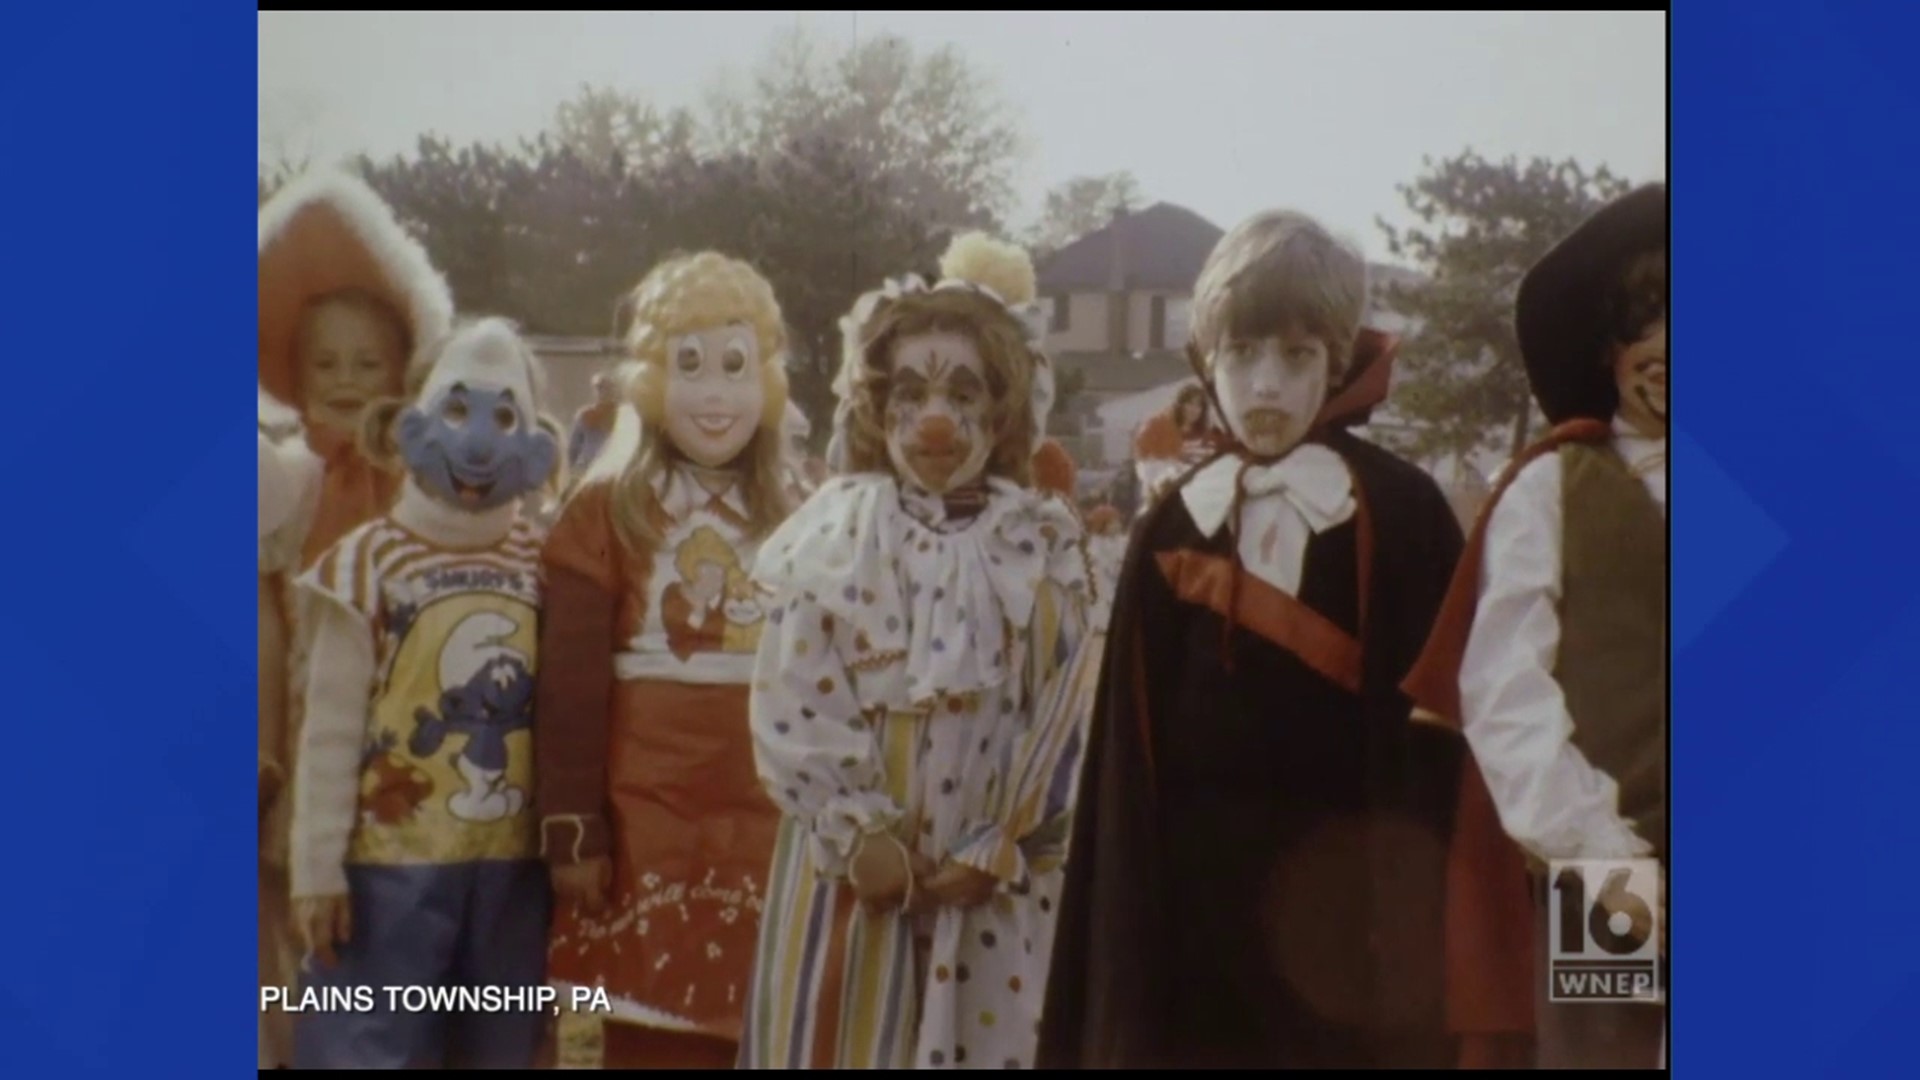 We dug deep into the WNEP Archive, looking for some Halloween history, and found this film from a Plains Township Halloween parade from 1982.